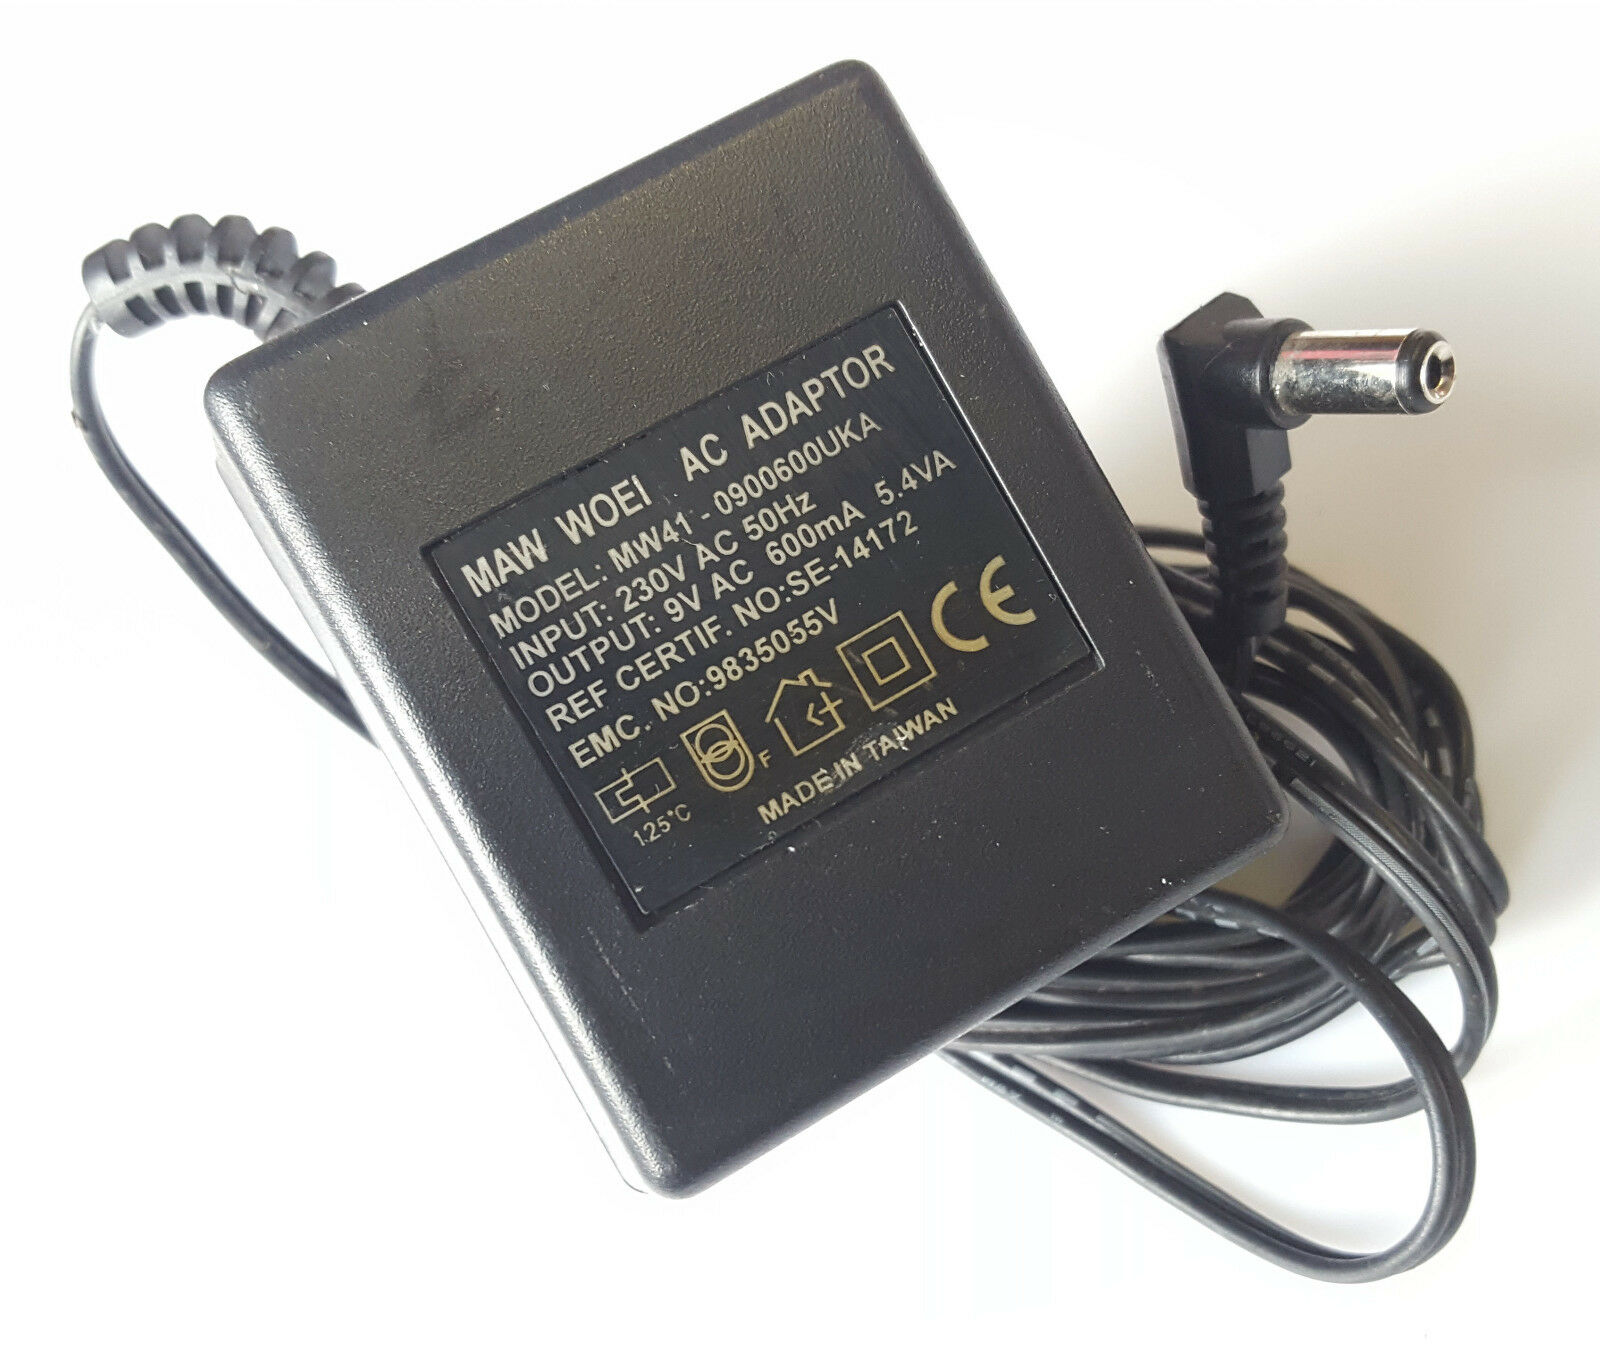 *Brand NEW* 9V 0.6A AC/DC ADAPTER MAW WOEI MW41-0900600UKA POWER SUPPLY